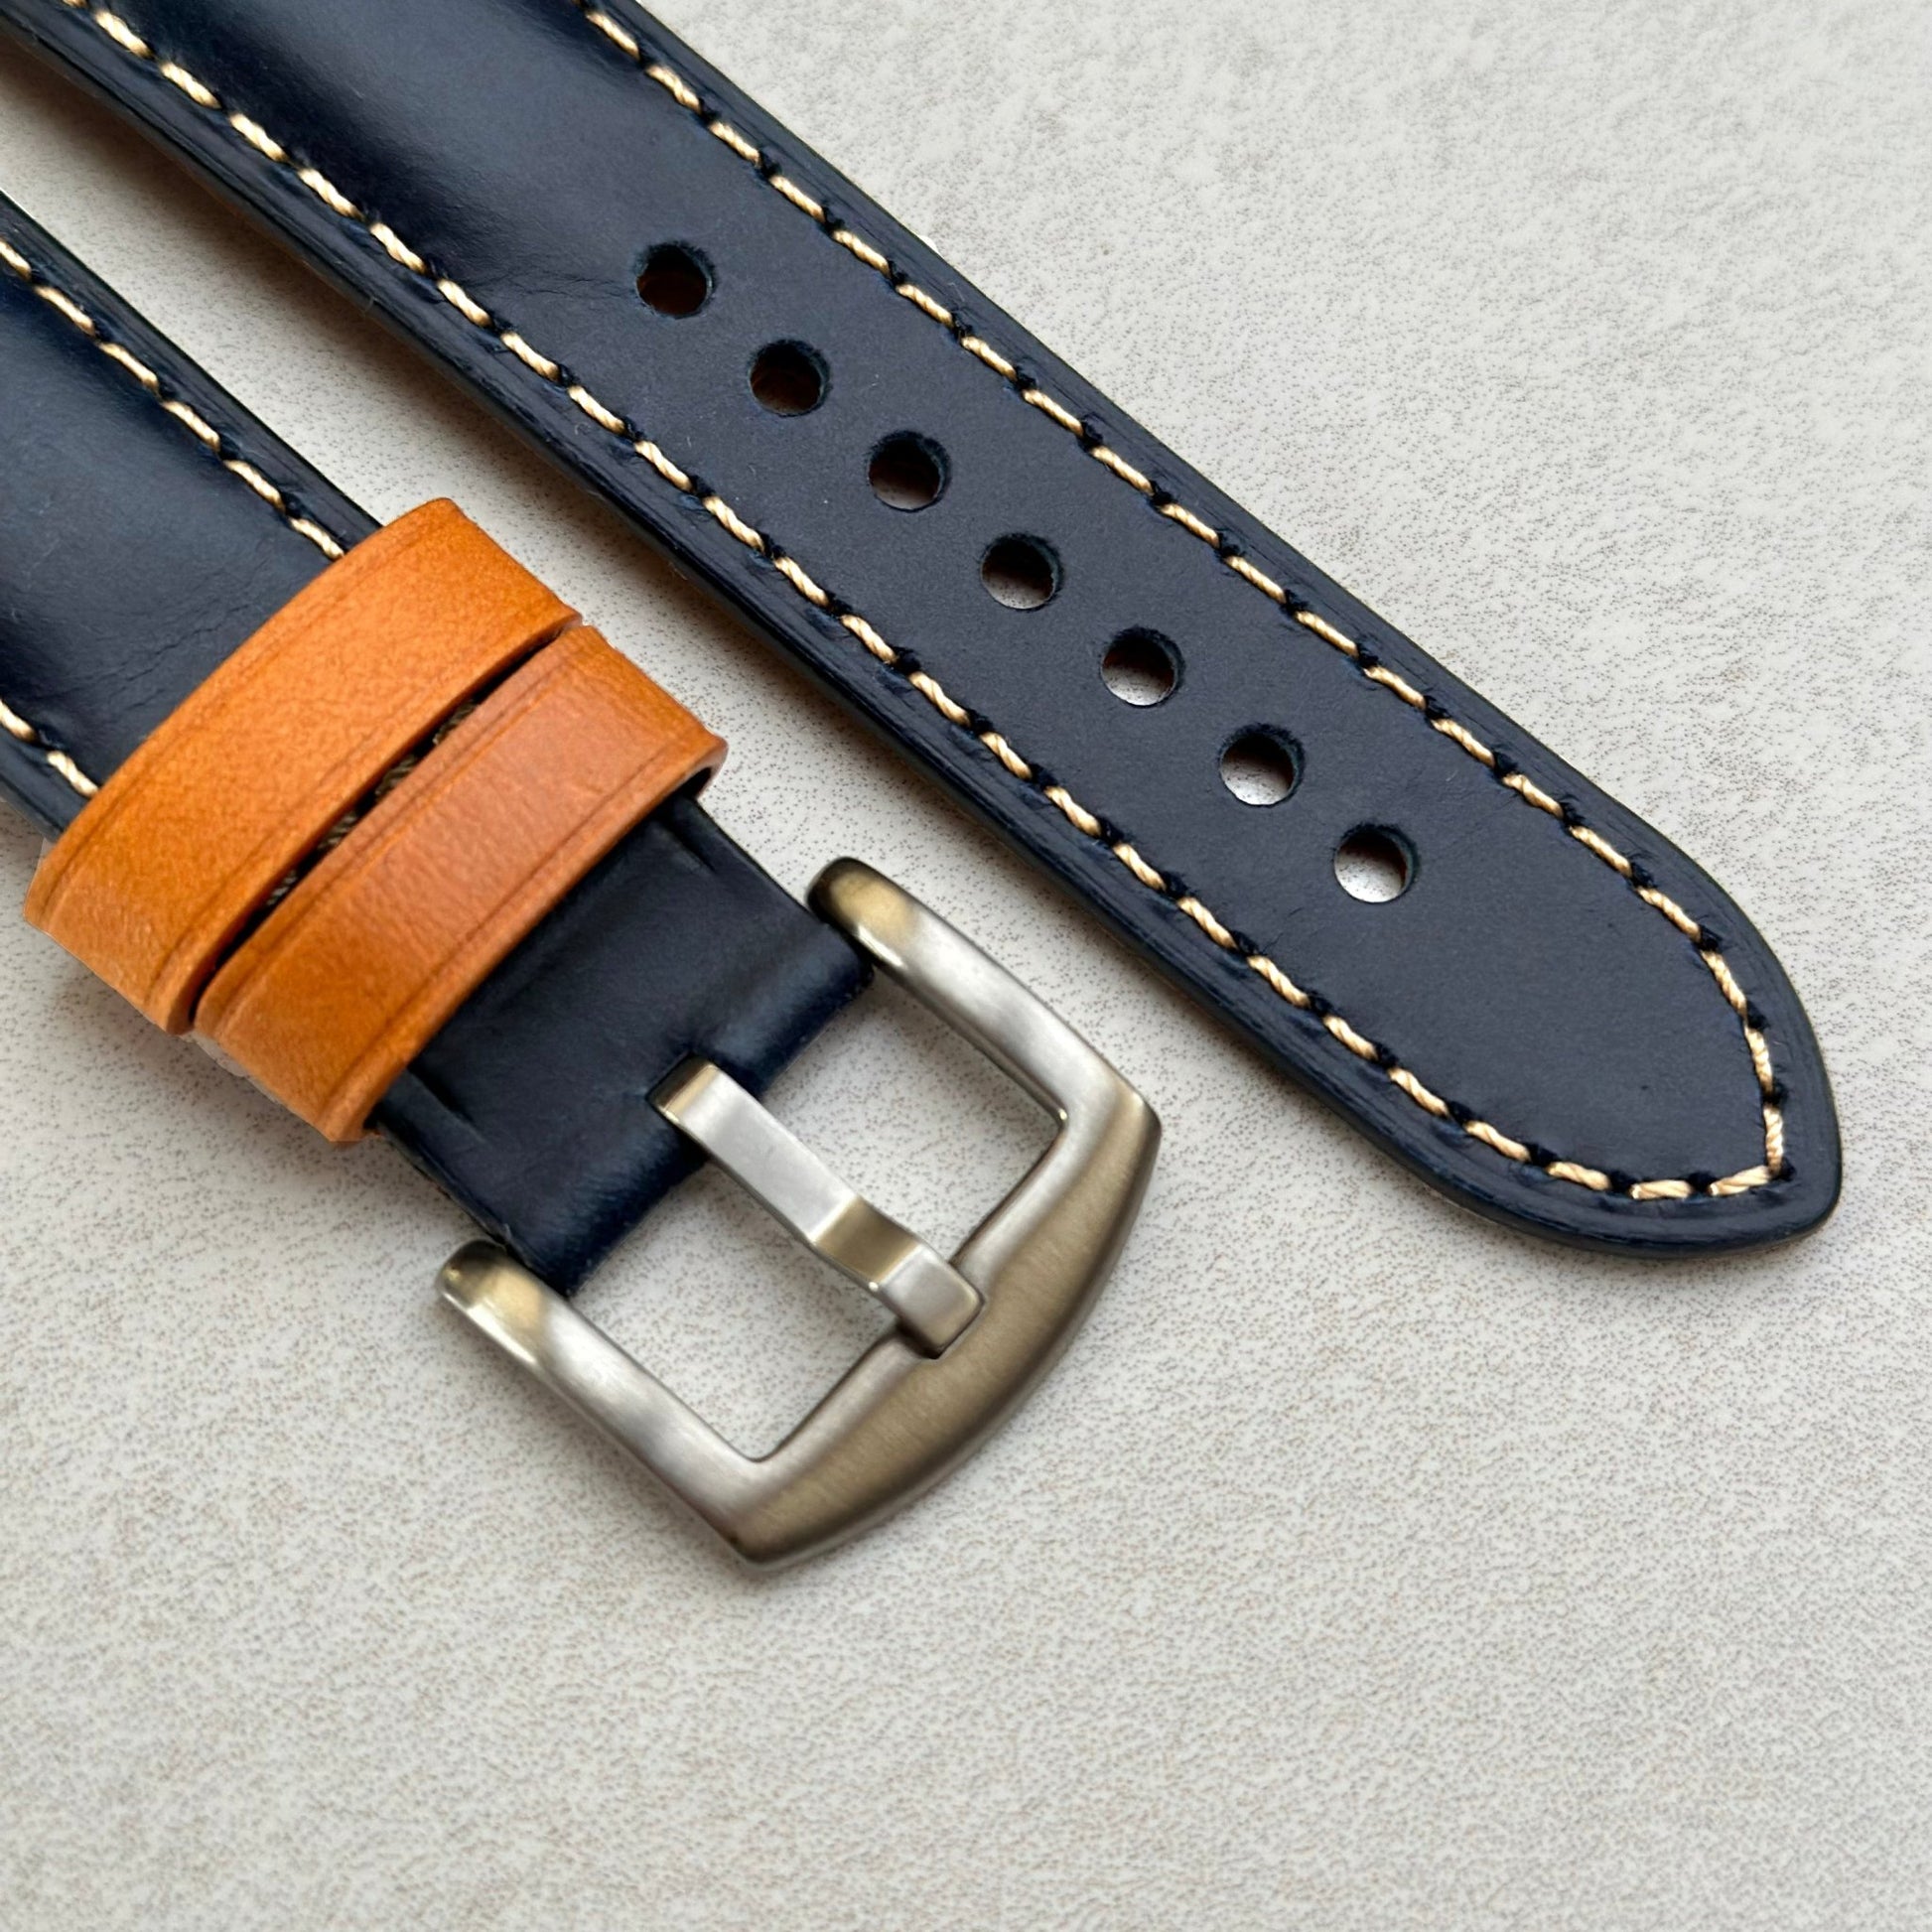 Brushed 316L stainless steel buckle on the Oxford blue full grain leather watch strap. Watch And Strap.